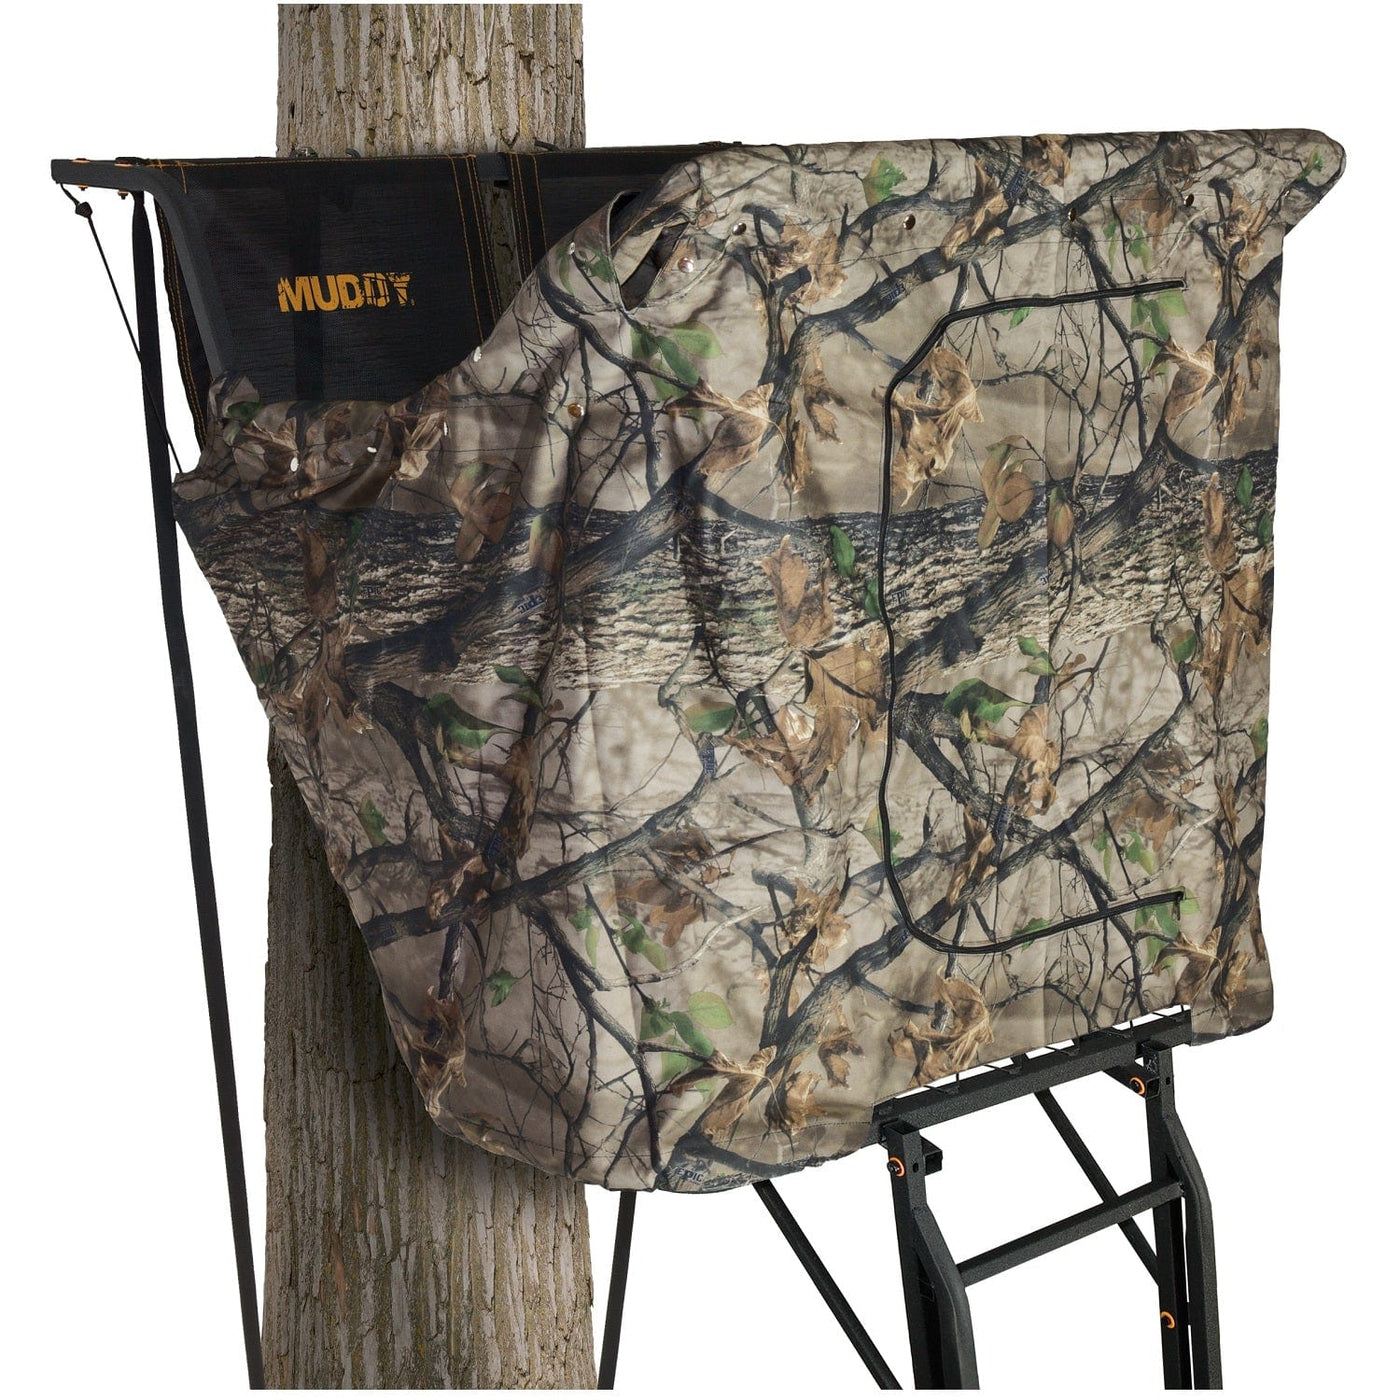 Muddy Muddy Made to Fit Blind Kit II- Fitting Sd Kick and Sky-Rise Hunting